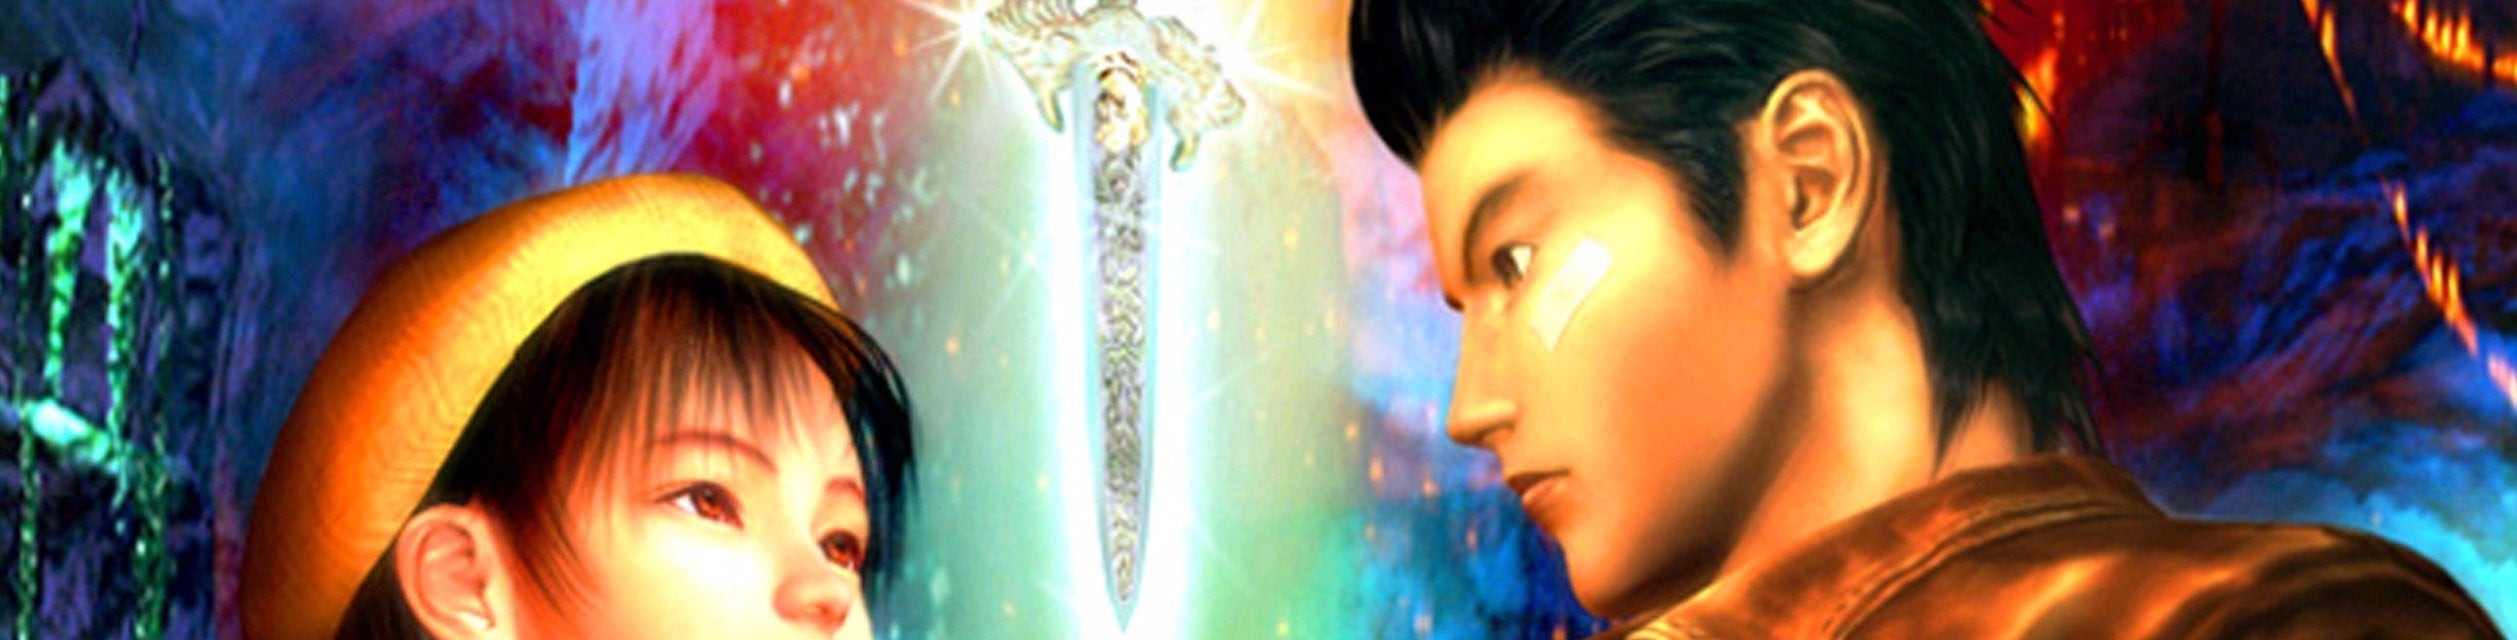 Image for Video: Can Shenmue 3 live up to its legend?